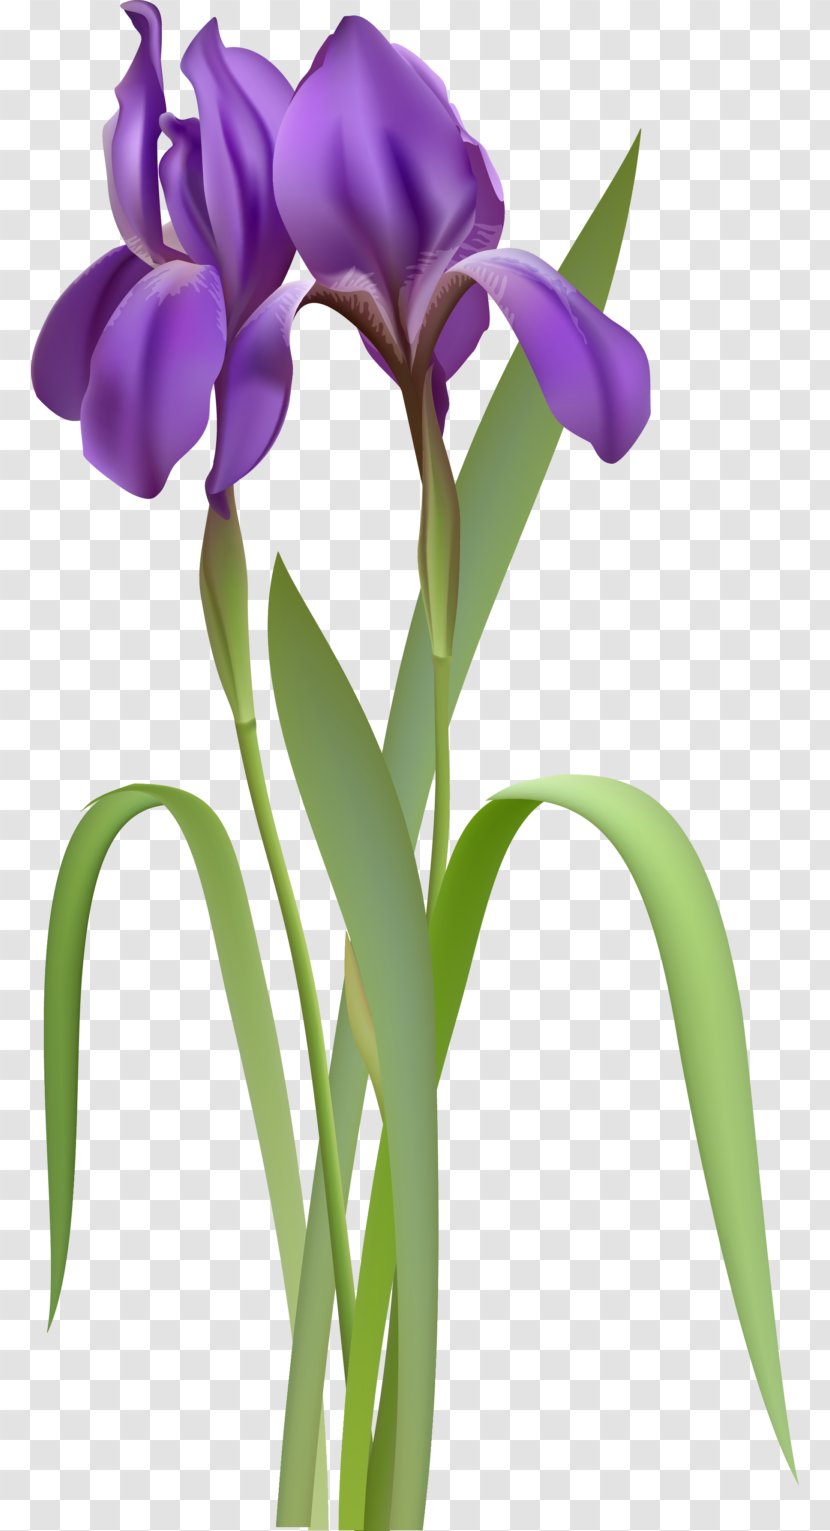 regression analysis clipart flowers